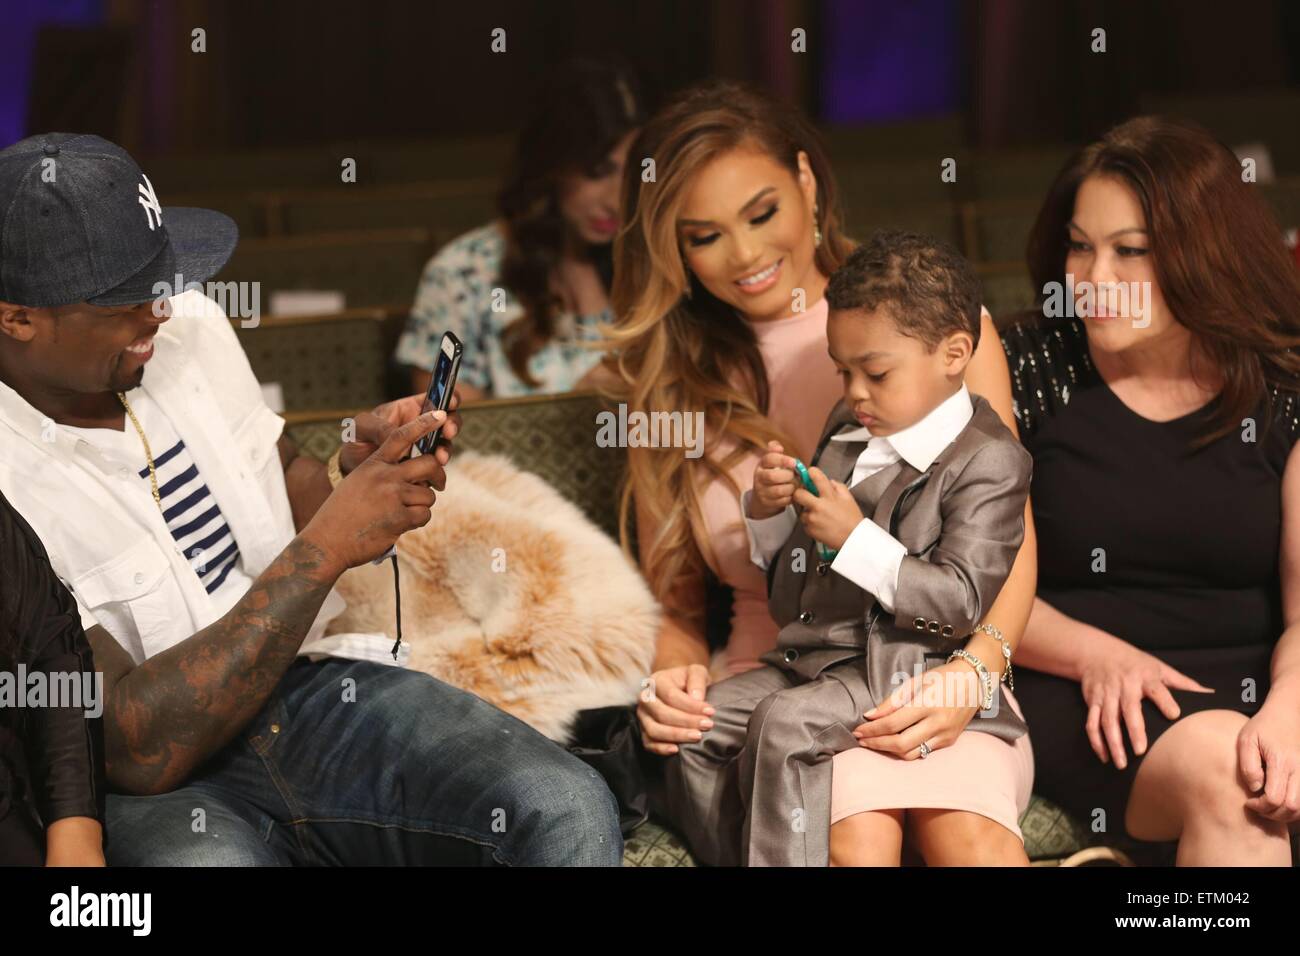 50 Cent And Model Daphne Joy Kick Off La Fashion Week Supporting